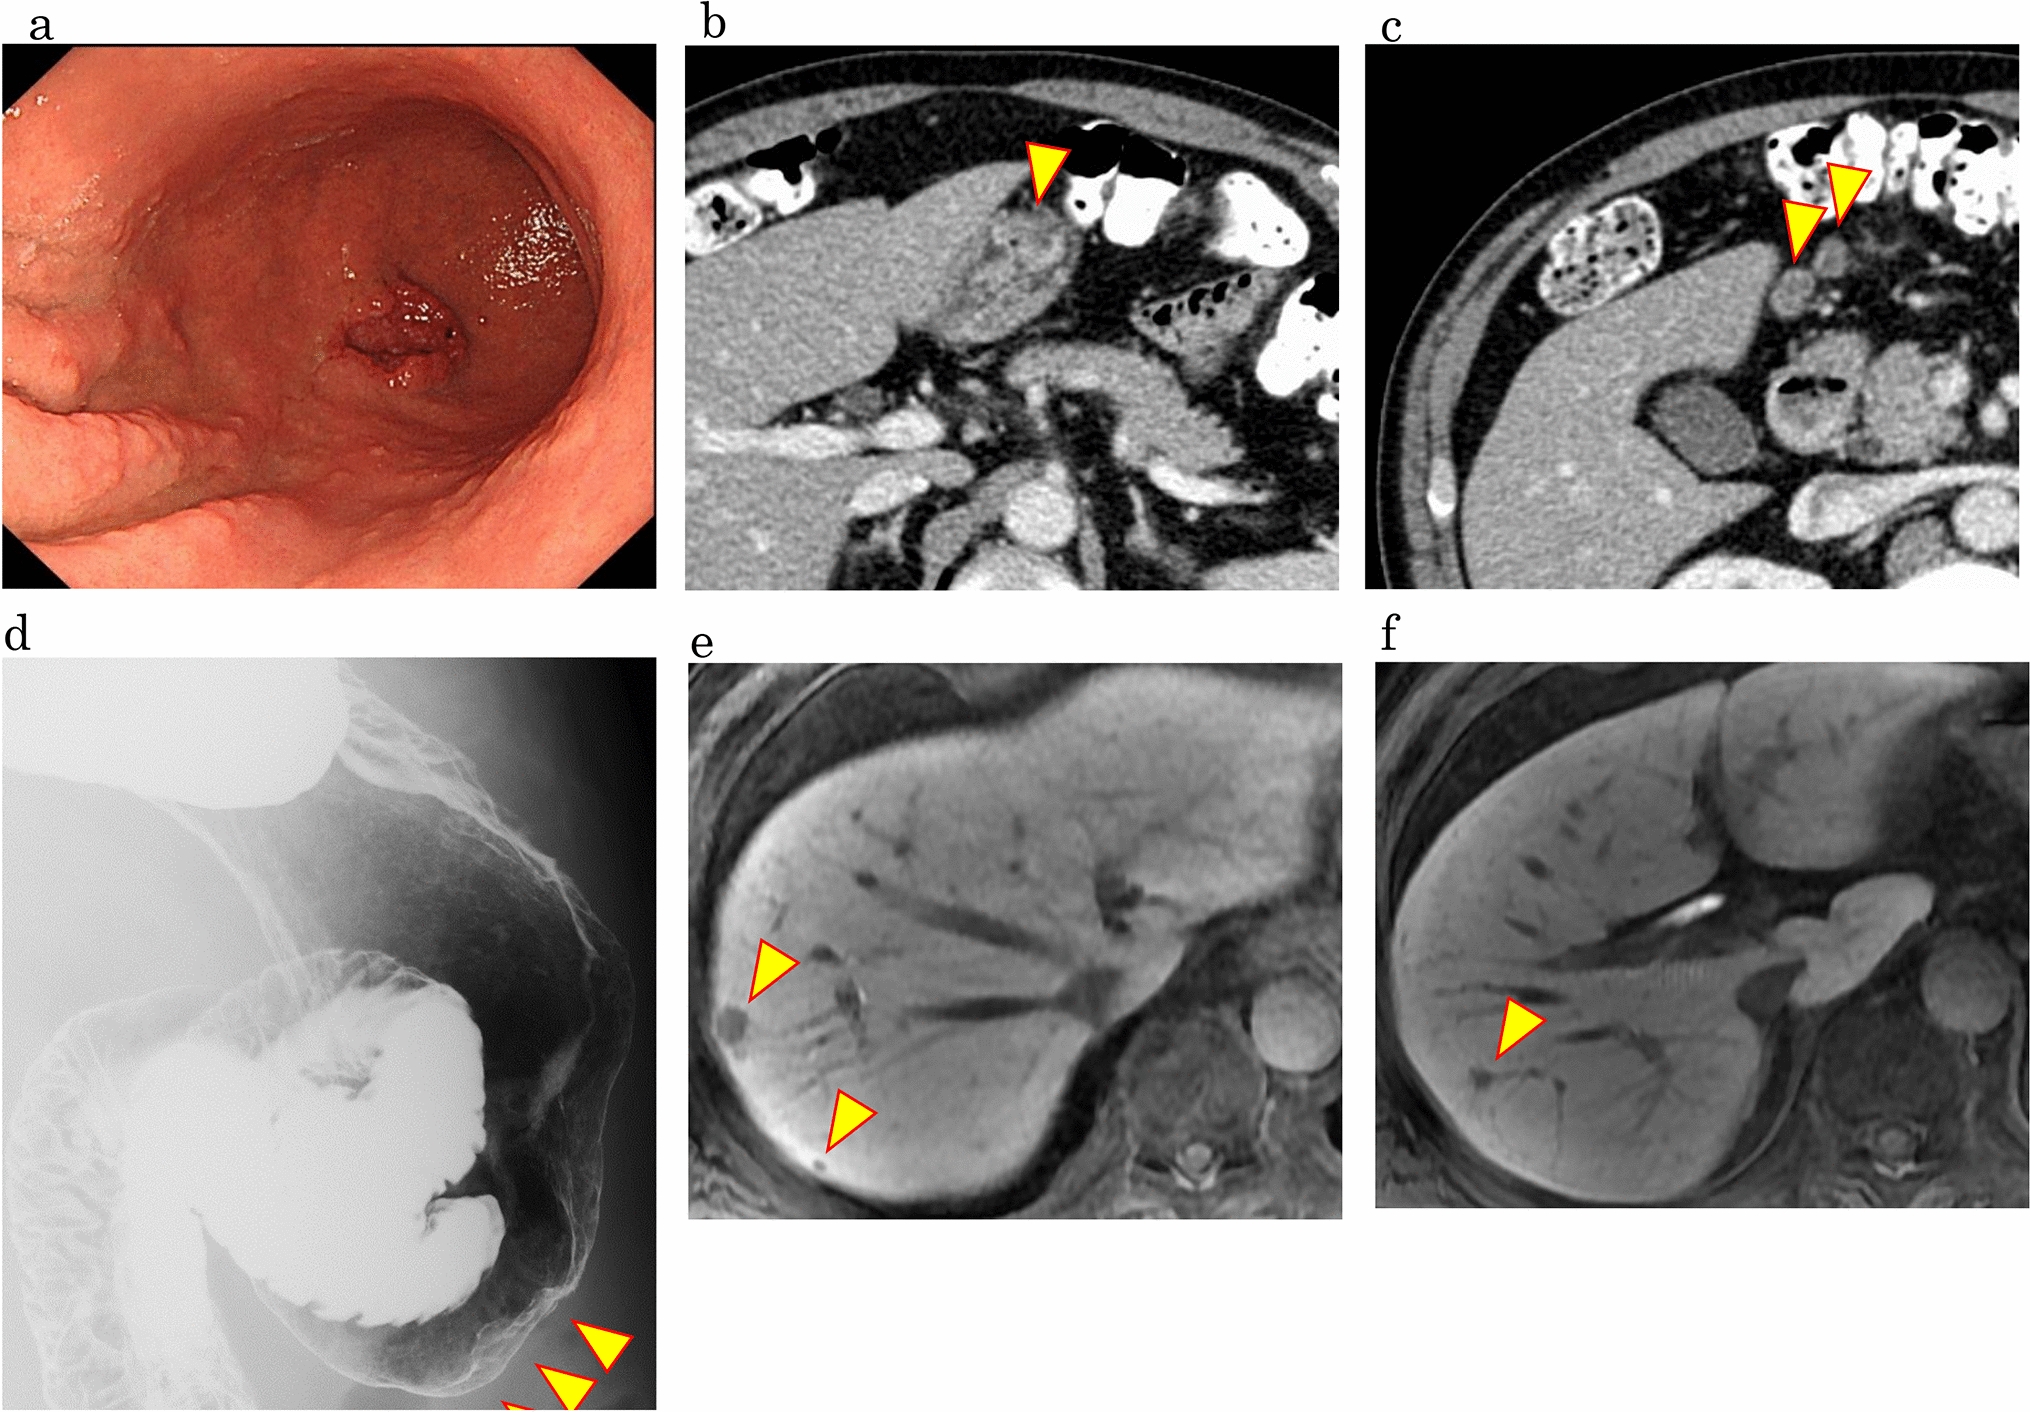 Conversion surgery for stage IV gastric cancer with multiple liver metastases with a complete pathological response to S-1 plus oxaliplatin therapy